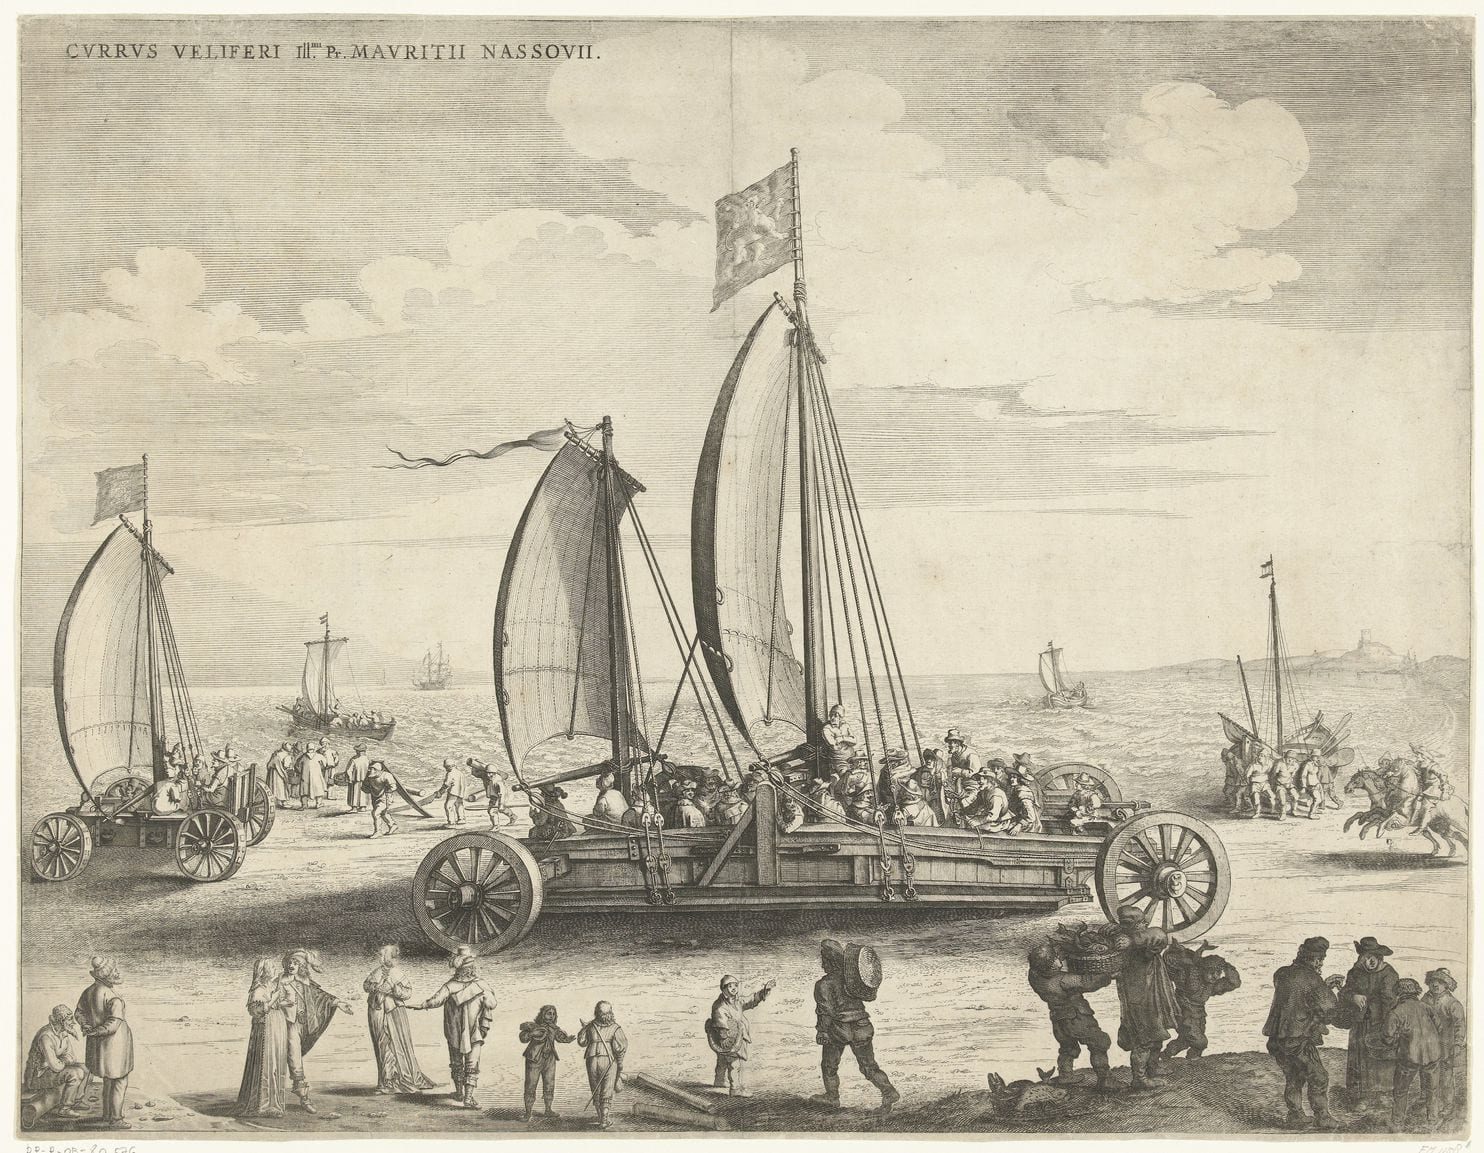 To adjust to new weather patterns, the Dutch developed such inventions as the “sailing car” or ”land yacht,” which used wind power to haul people and goods along beaches.